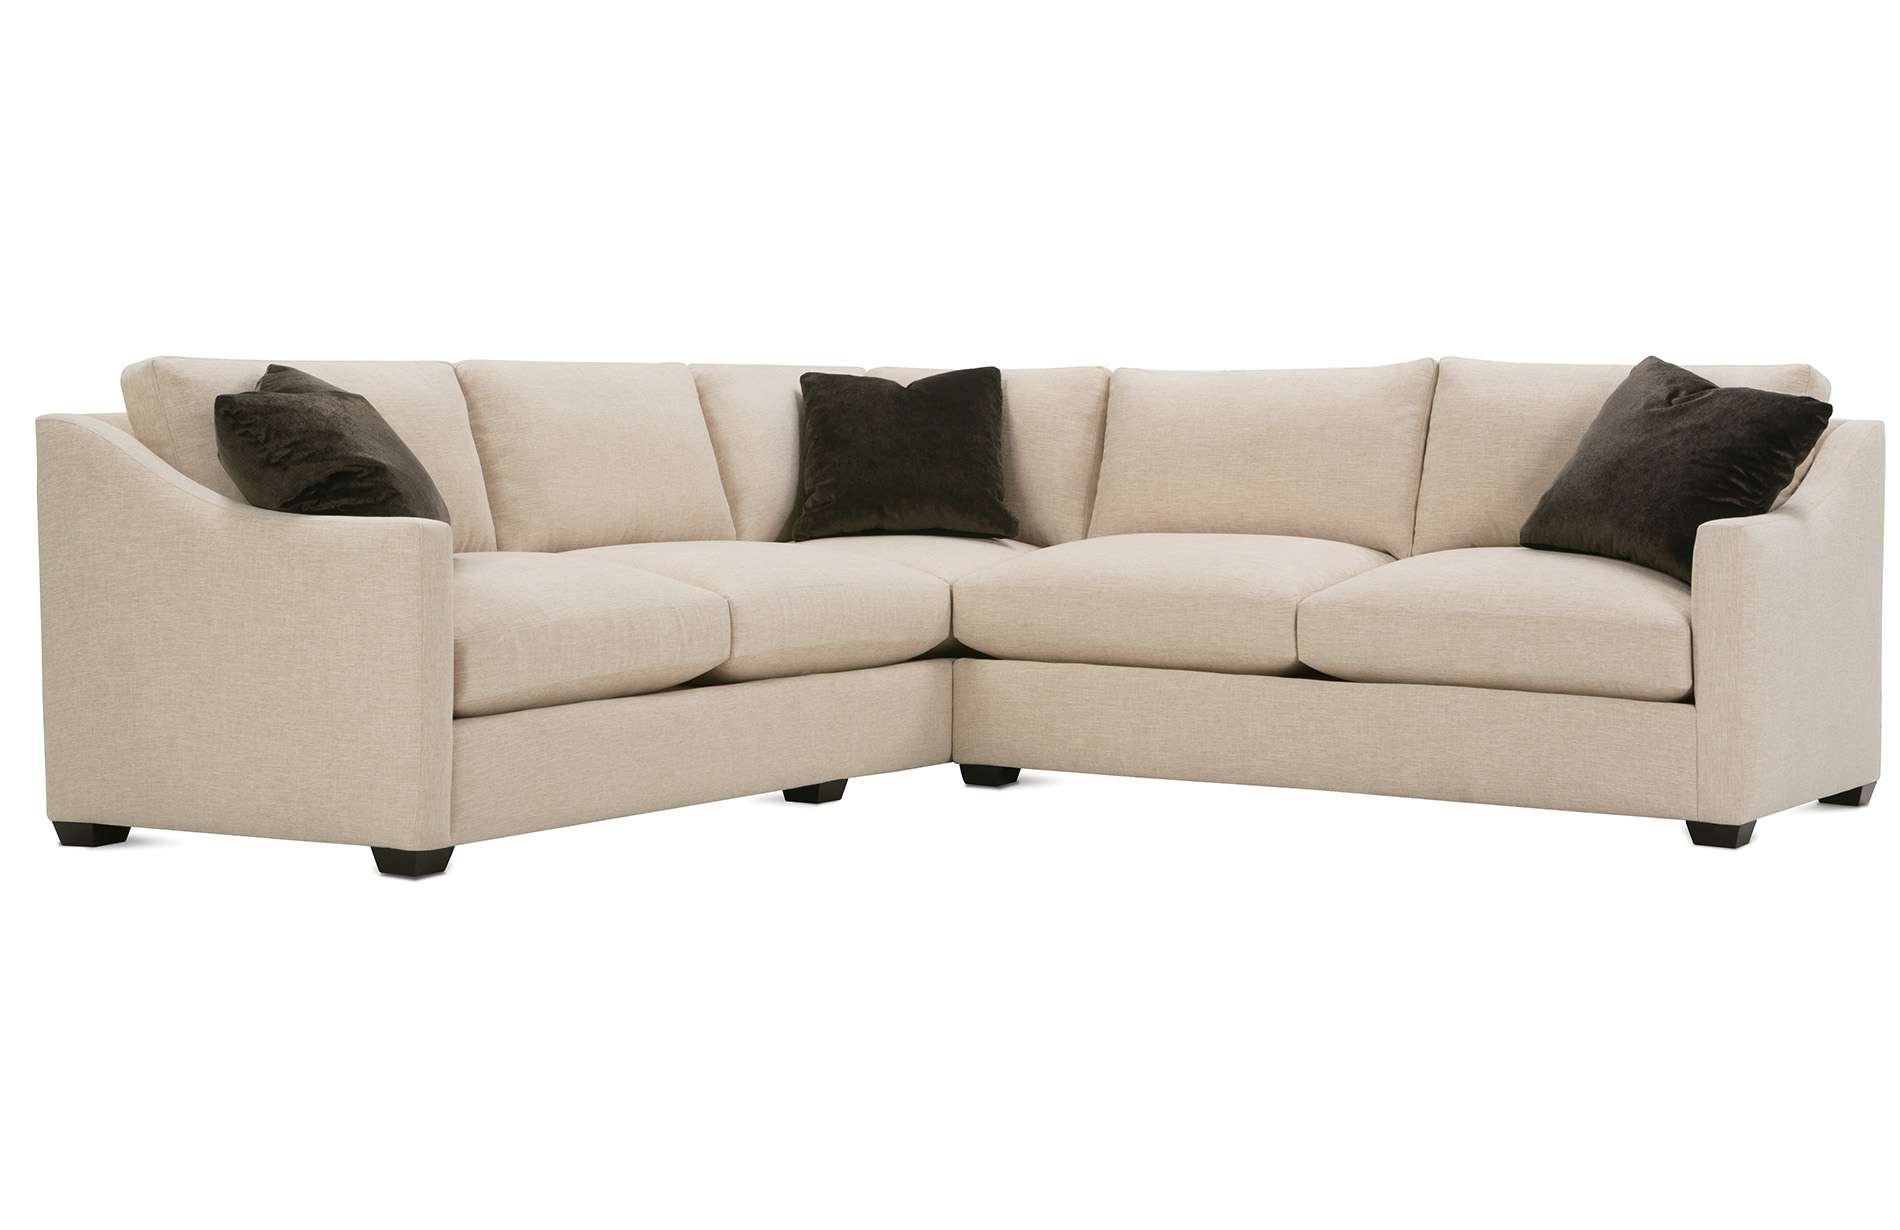 a beige sectional couch with black pillows on it